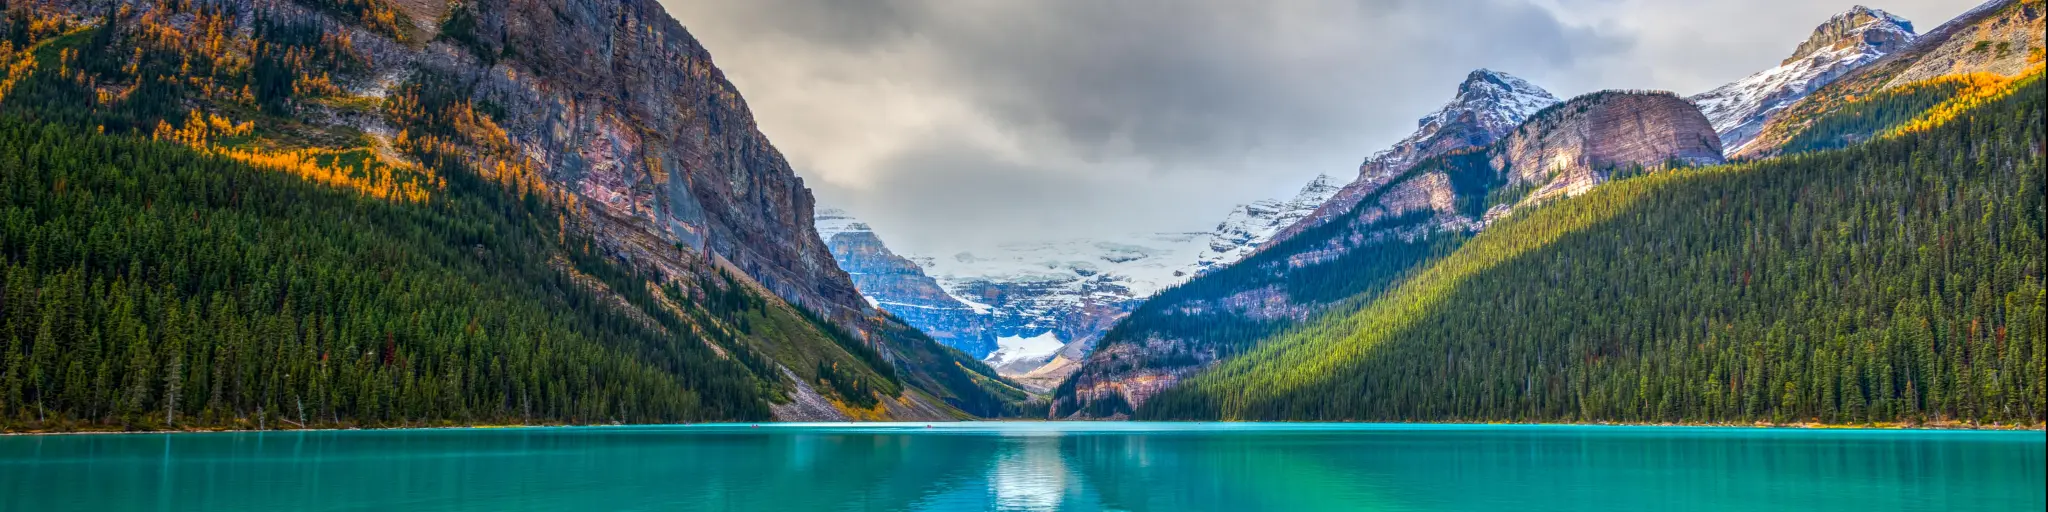 Banff National Park, Rocky Mountains, Alberta, Canada with beautiful autumn views of iconic Lake Louise, with the mountains and forest in the background.